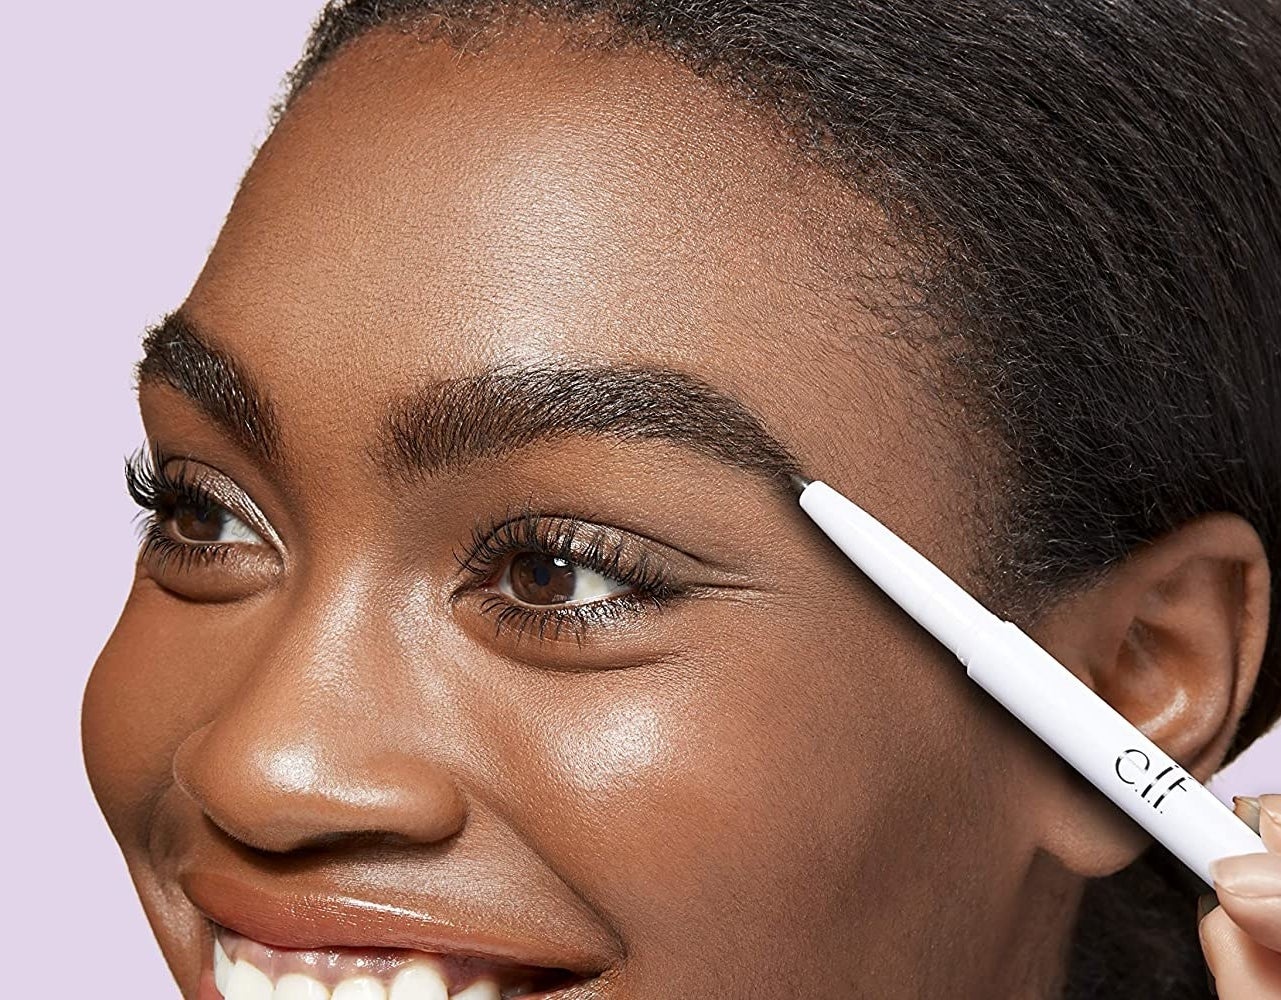 A person using a brow pencils to fill in their brows